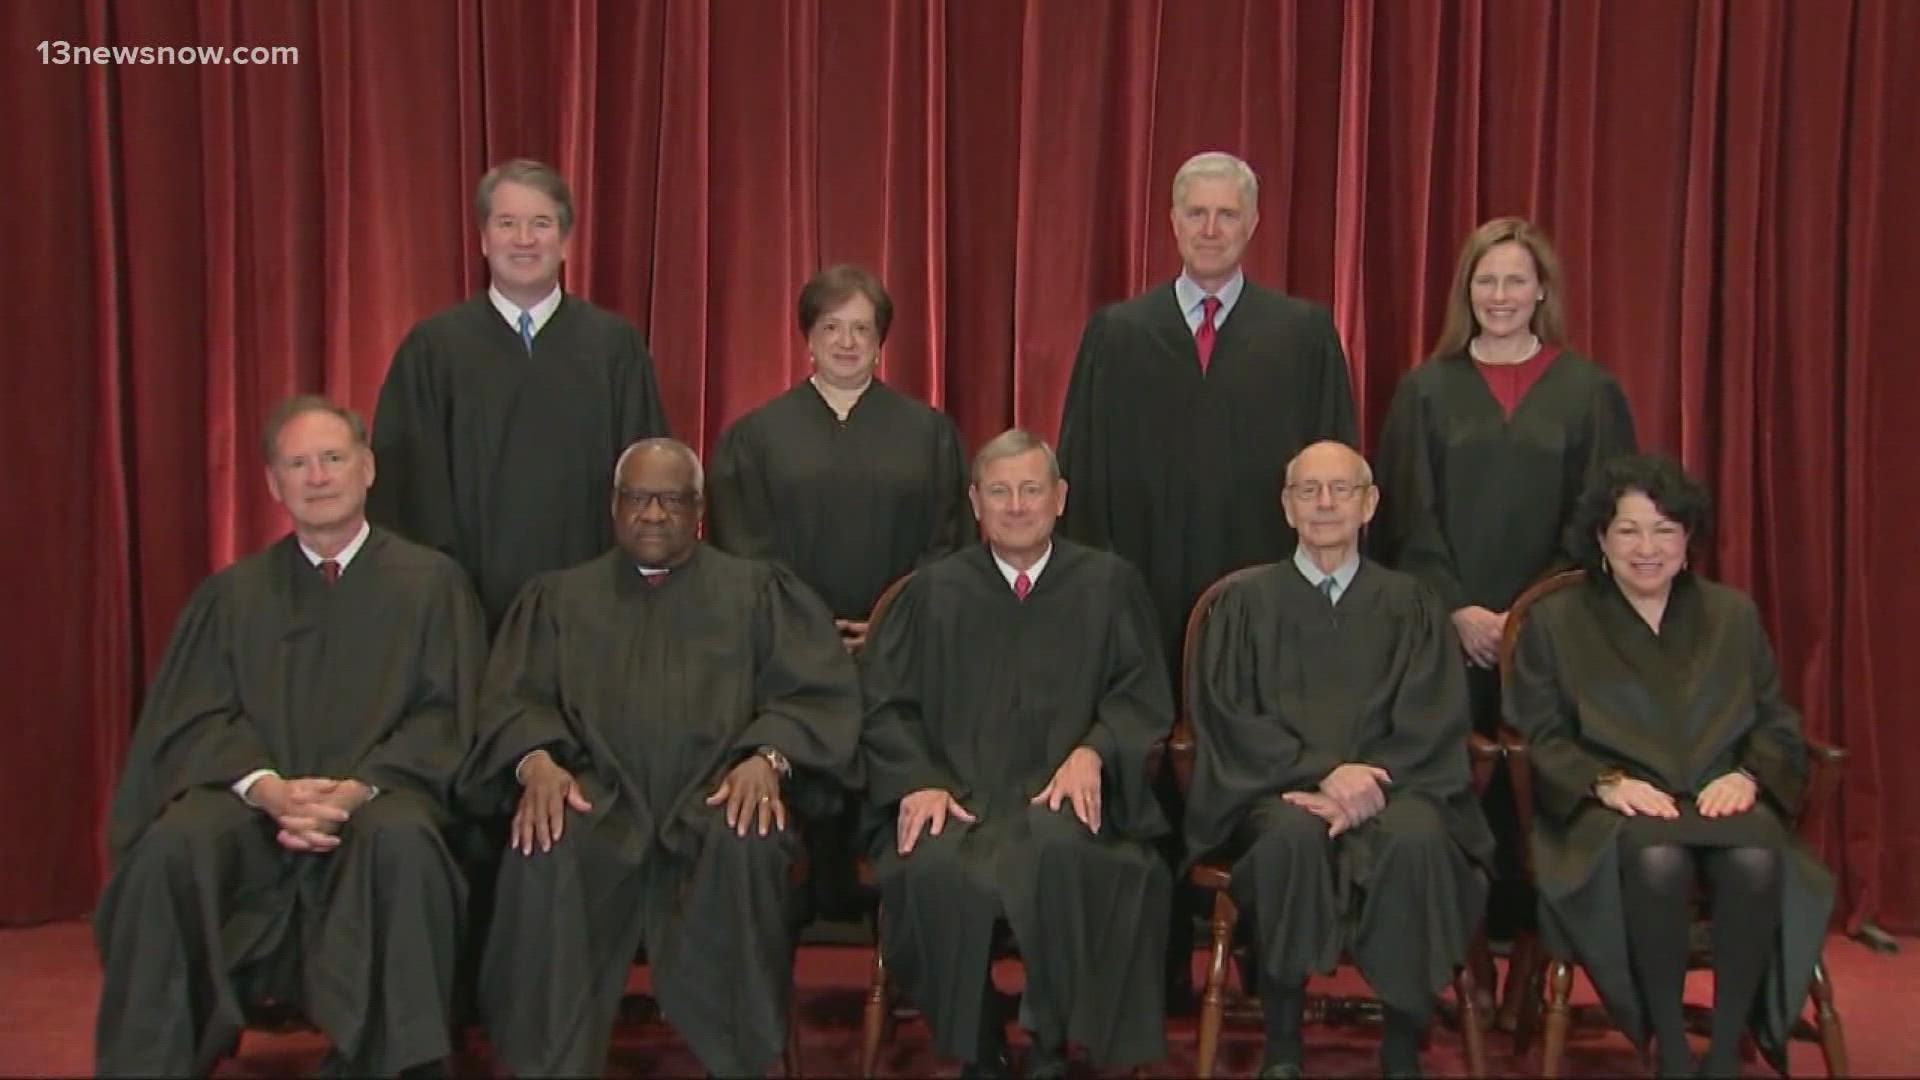 The Supreme Court finished its term after re-writing the books on abortion, guns, climate change, and asylum policy.